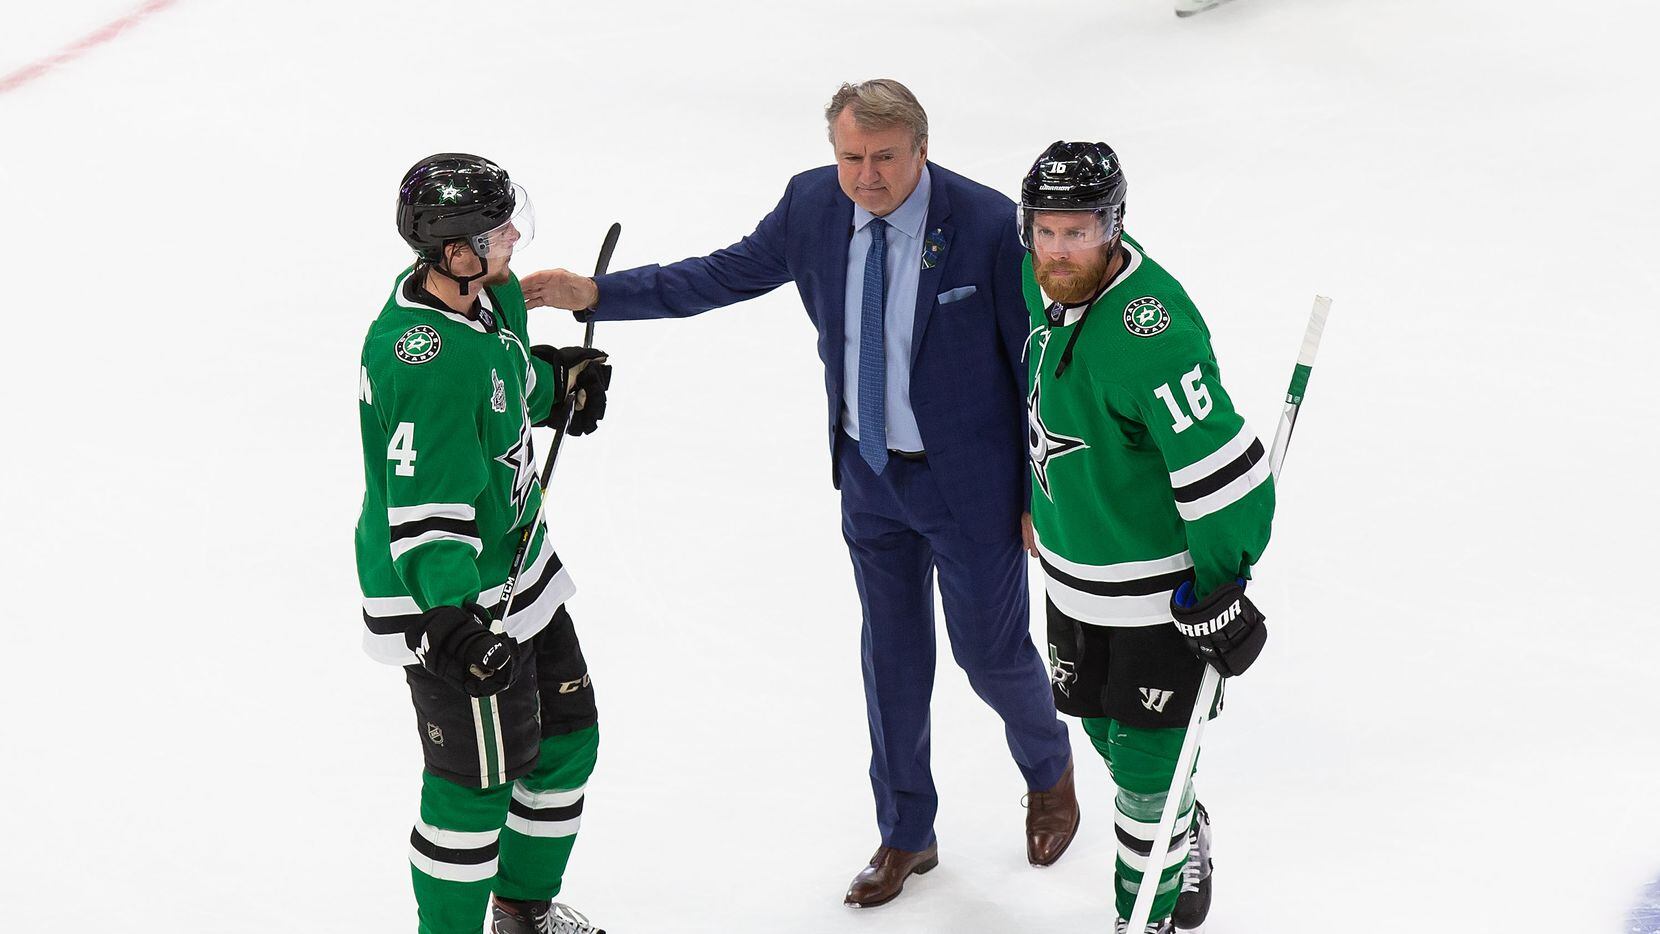 Miro Heiskanen (4), interim head coach Rick Bowness and Joe Pavelski (16) of the Dallas Stars react to their loss against the Tampa Bay Lightning during Game Six of the Stanley Cup Final at Rogers Place in Edmonton, Alberta, Canada on Monday, September 28, 2020.